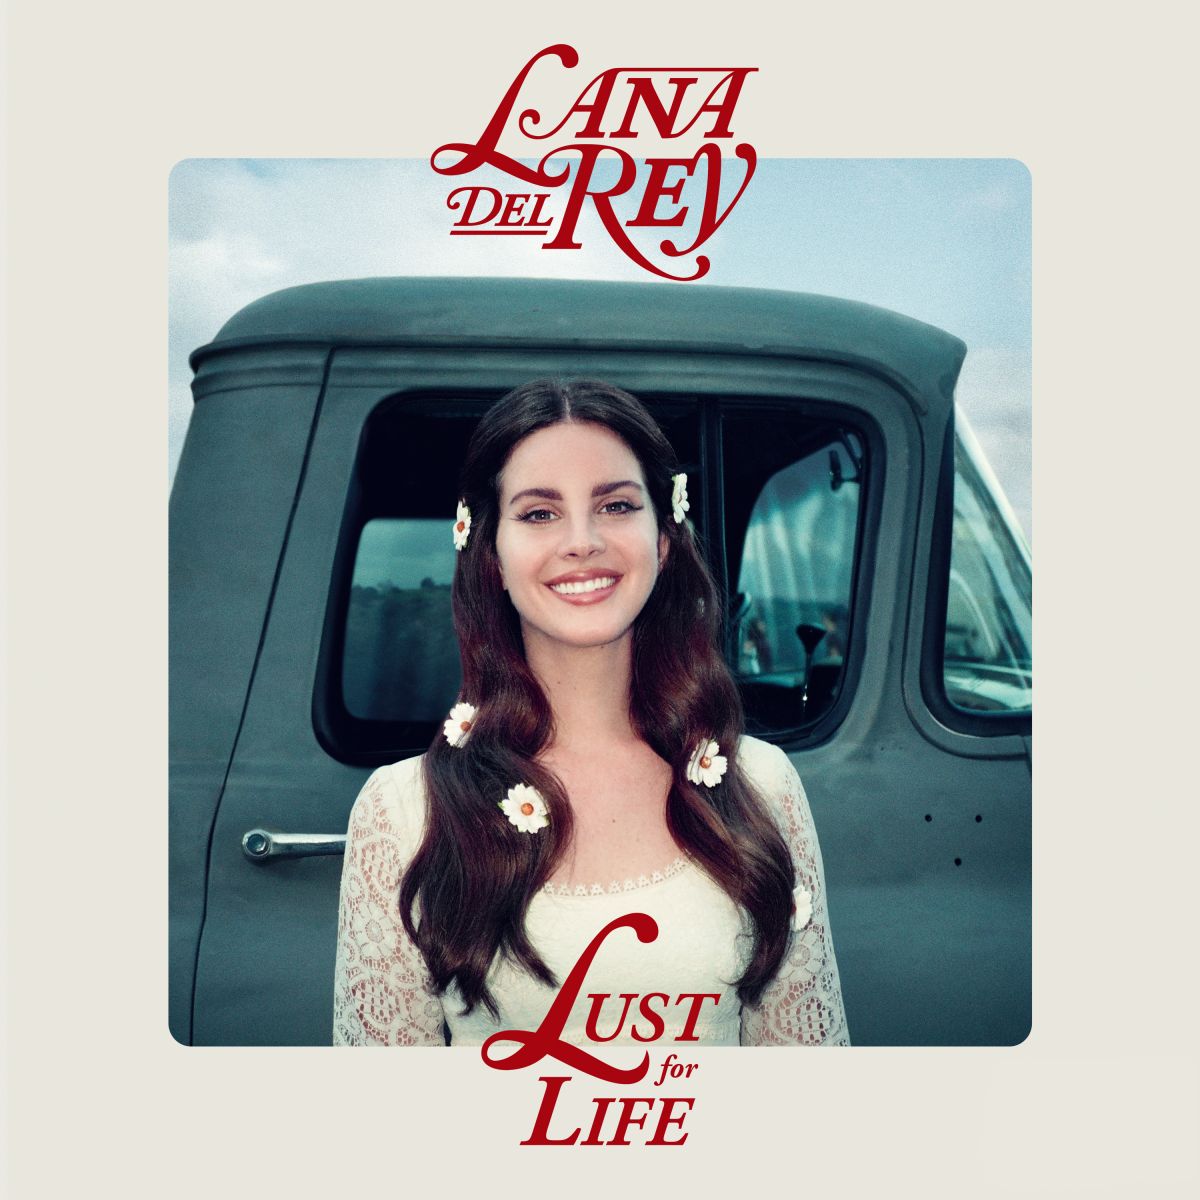 Here's Everything We Know About Lana Del Rey's New Album <i>Lust for Life</i> [UPDATE]” title=”lana-del-rey-lust-for-life-1499700072″ data-original-id=”248540″ data-adjusted-id=”248540″ class=”sm_size_full_width sm_alignment_center ” data-image-source=”professional” />
<p><strong>She might be a witch now</strong></p>
<p>The <em>Lust for Life</em> era finds Del Rey embracing the occult, cooking up a cauldron of musical ingredients in the <a href=